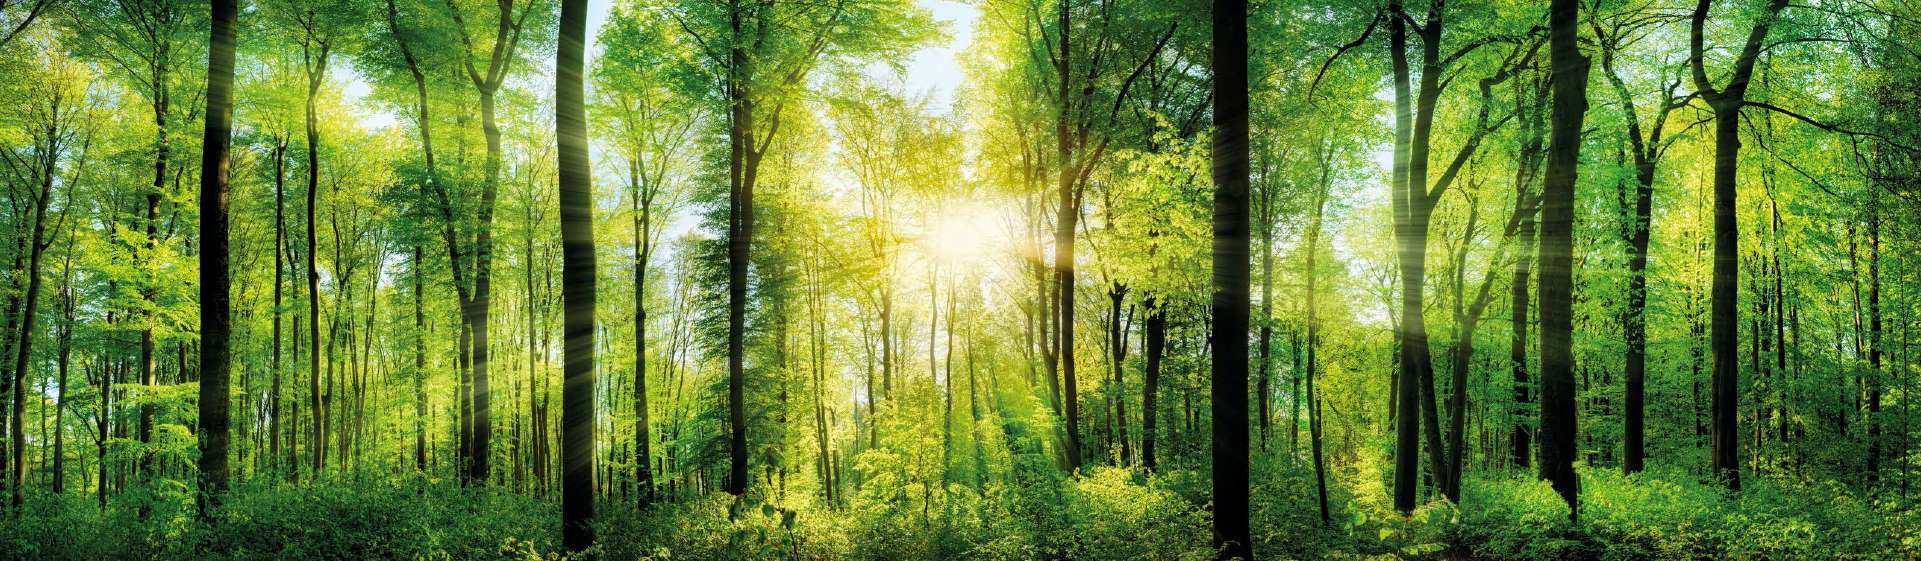 Sun shines in dense deciduous forest.